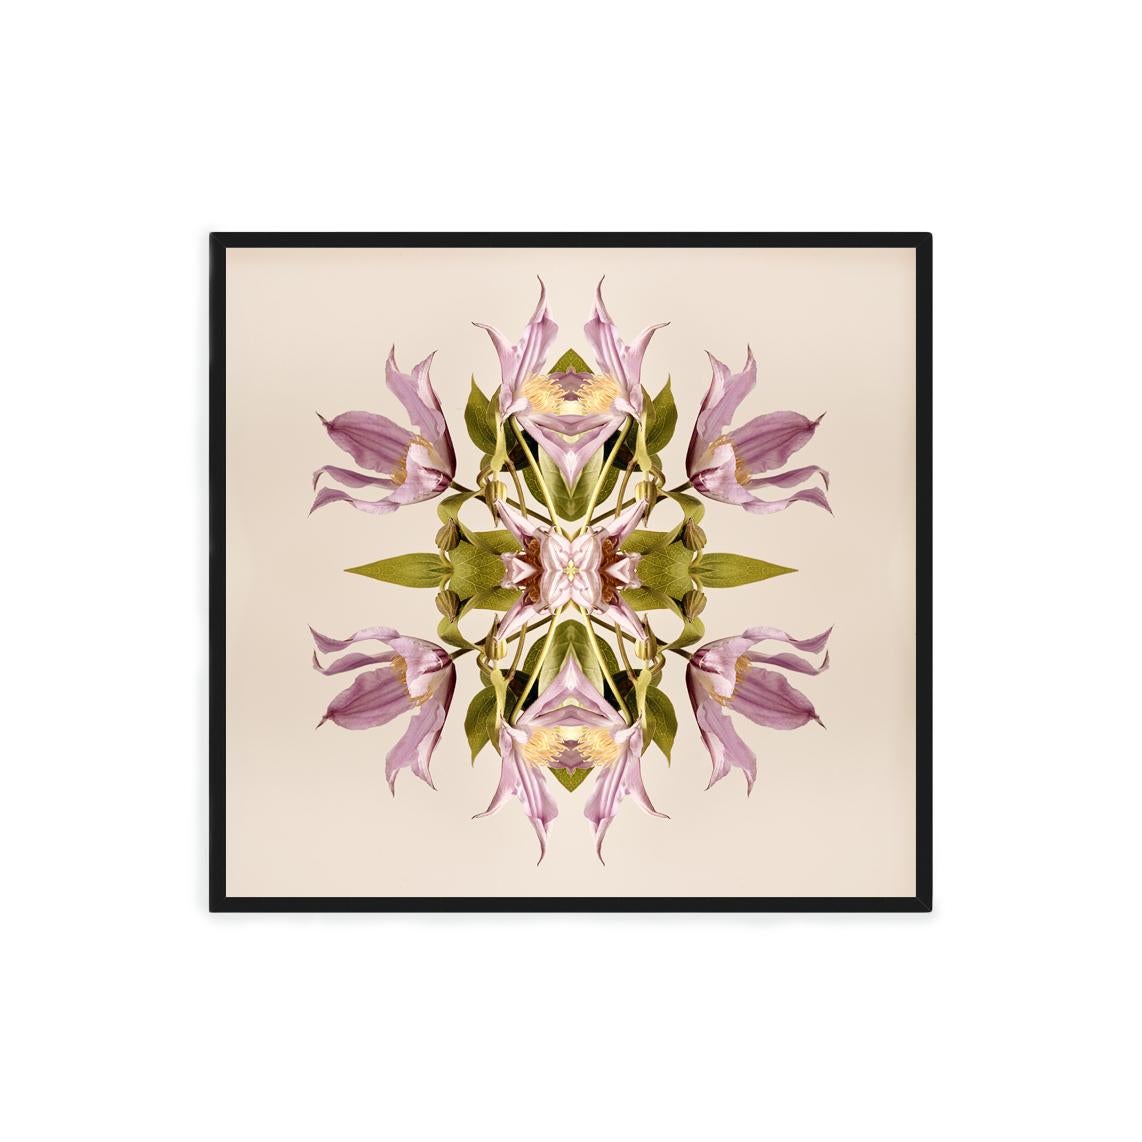 This print features the playful relationship between natural forms and botanicals. In this image Erin uses the natural composition of the purple and lavender flowers, and her own collage work, to create a hypnotic mandala with the floral. Some